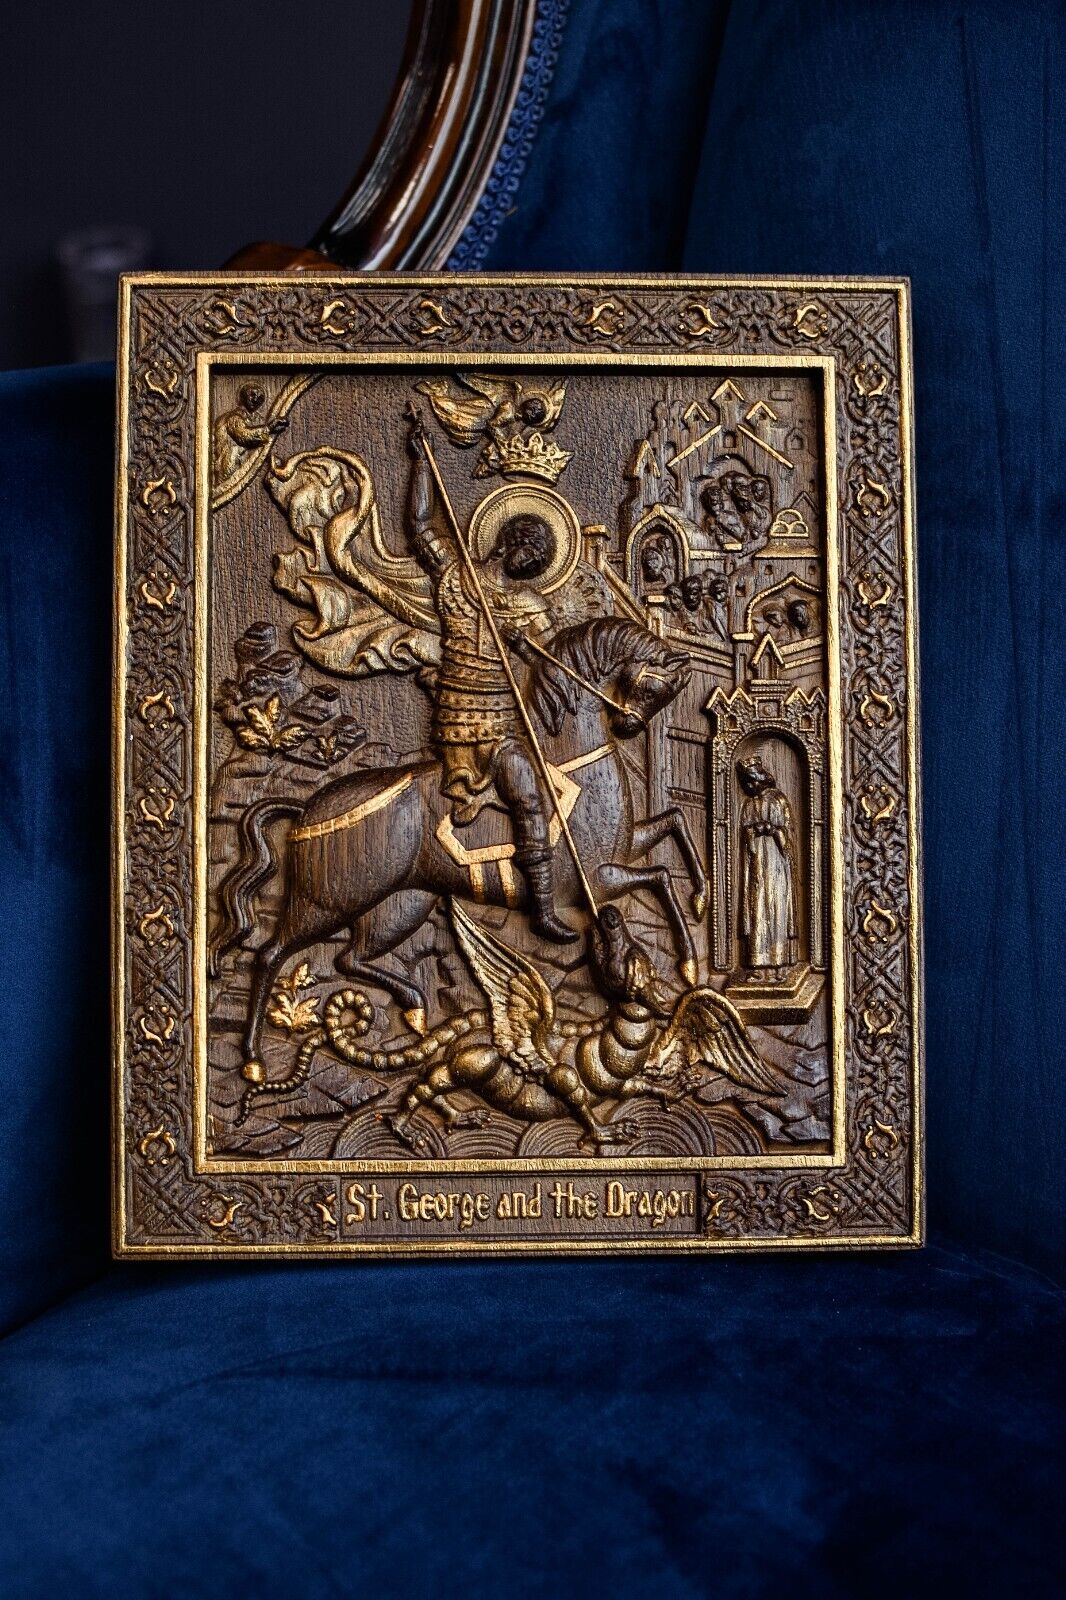 SAINT GEORGE WITHA DRAGON WOOD CARVED ICON RELIGIOUS GIFT WALL HANGING ART WORK